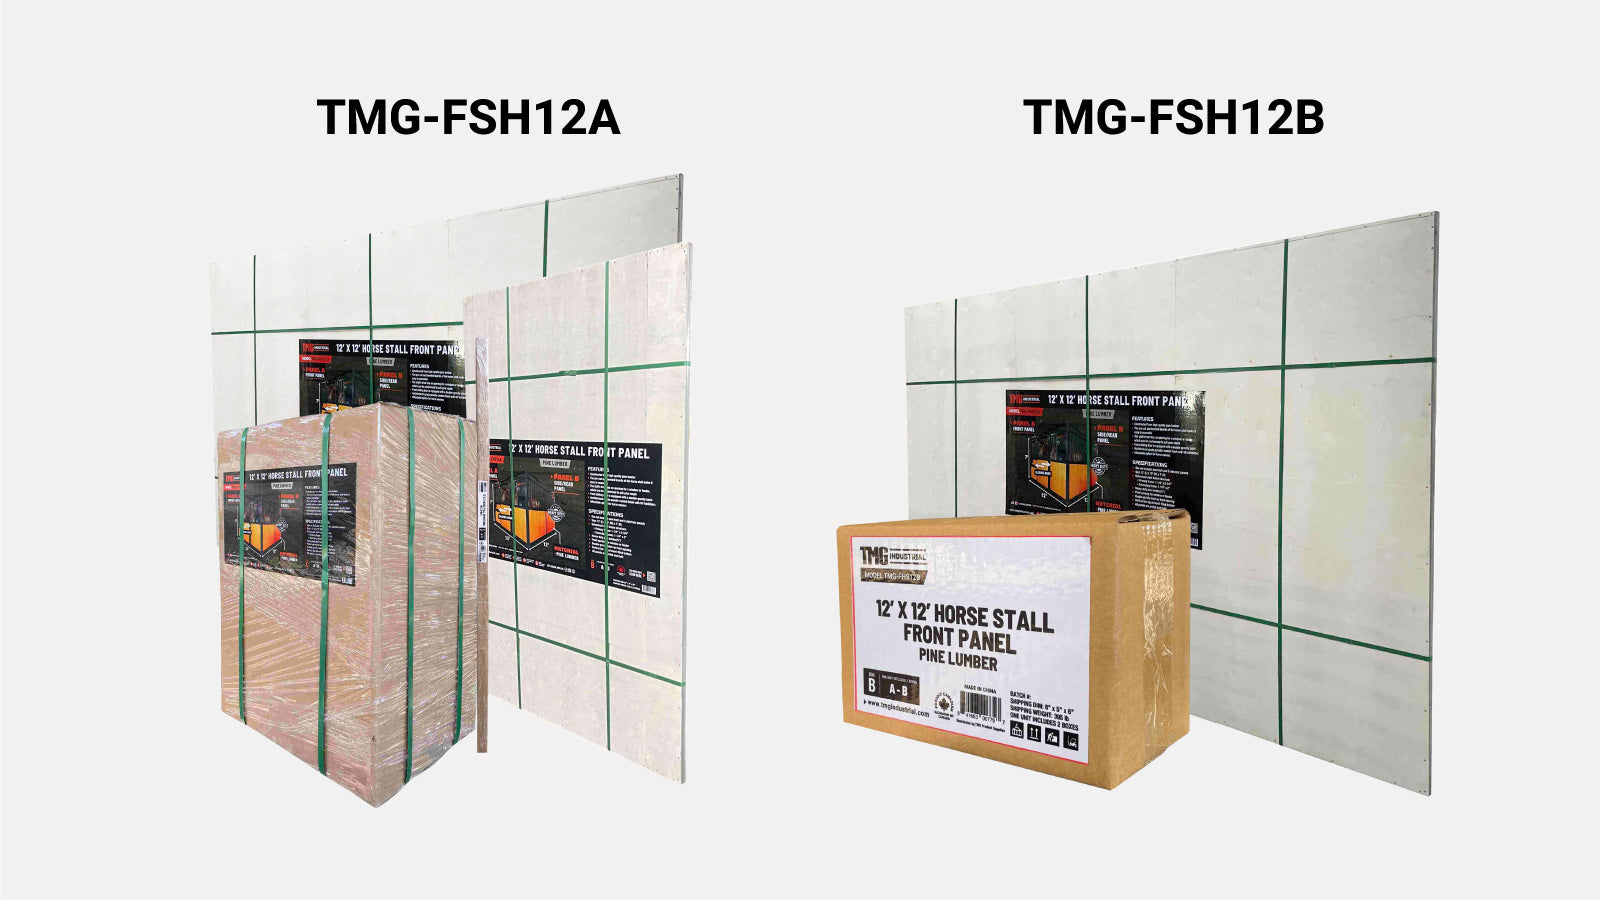 TMG Industrial 12’ Horse Stall Pine Lumber Panel, Vertical Bar Top & Wood-Filled Bottom, Front panel c/w Window/Feeder and Sliding Door, TMG-FHS12A and FHS12B-shipping-info-image